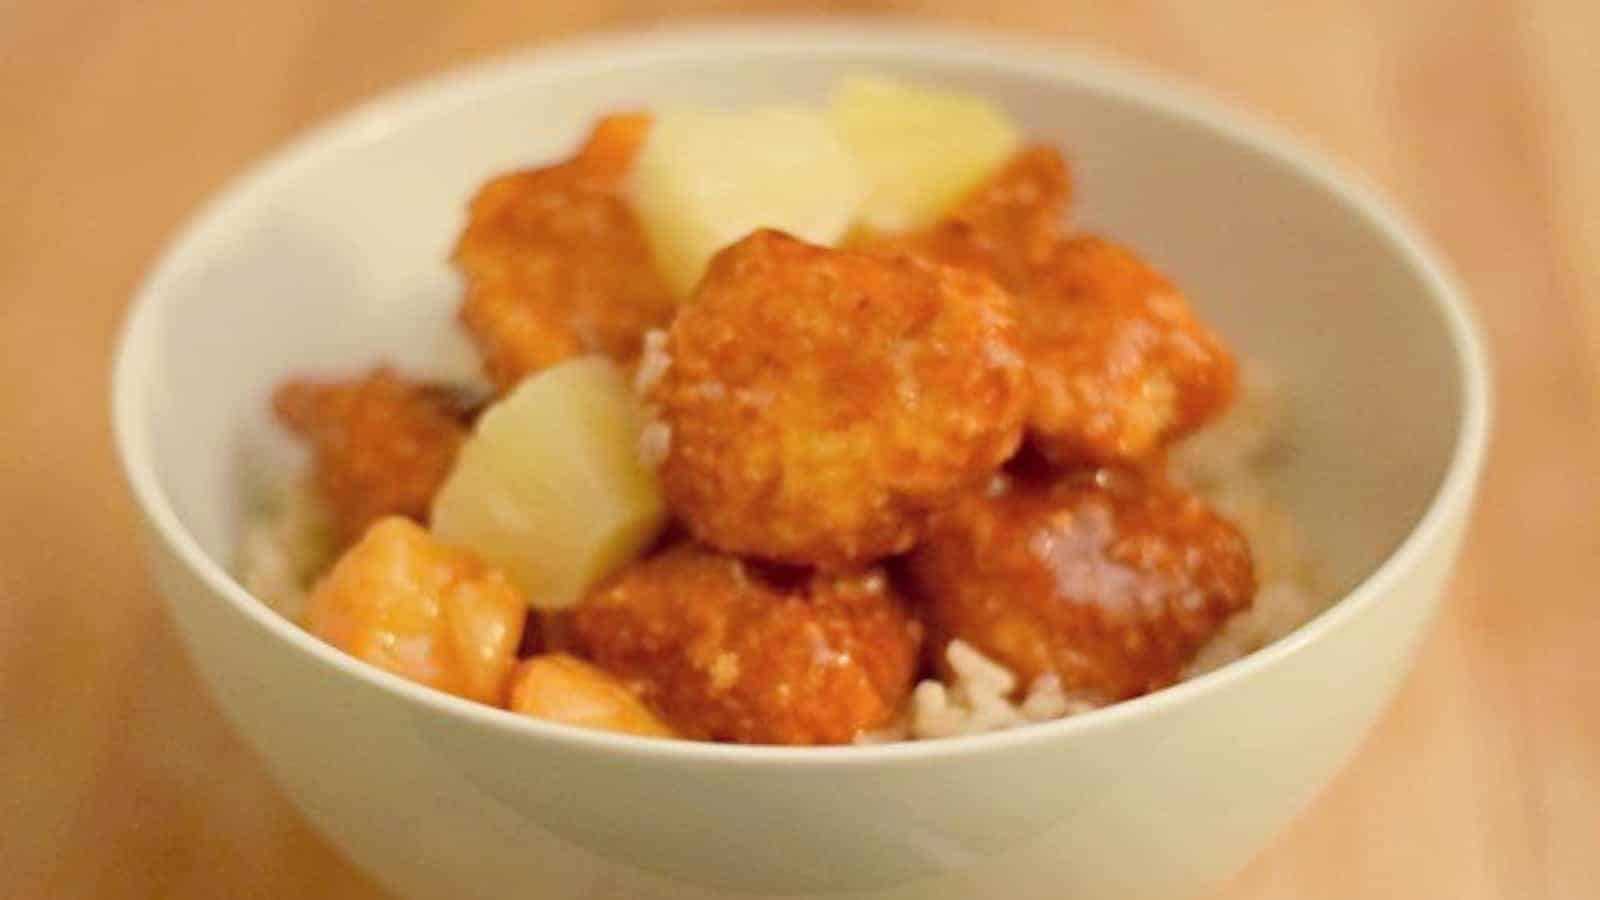 Image shows a Bowl of baked sweet and sour chicken with pineapple.